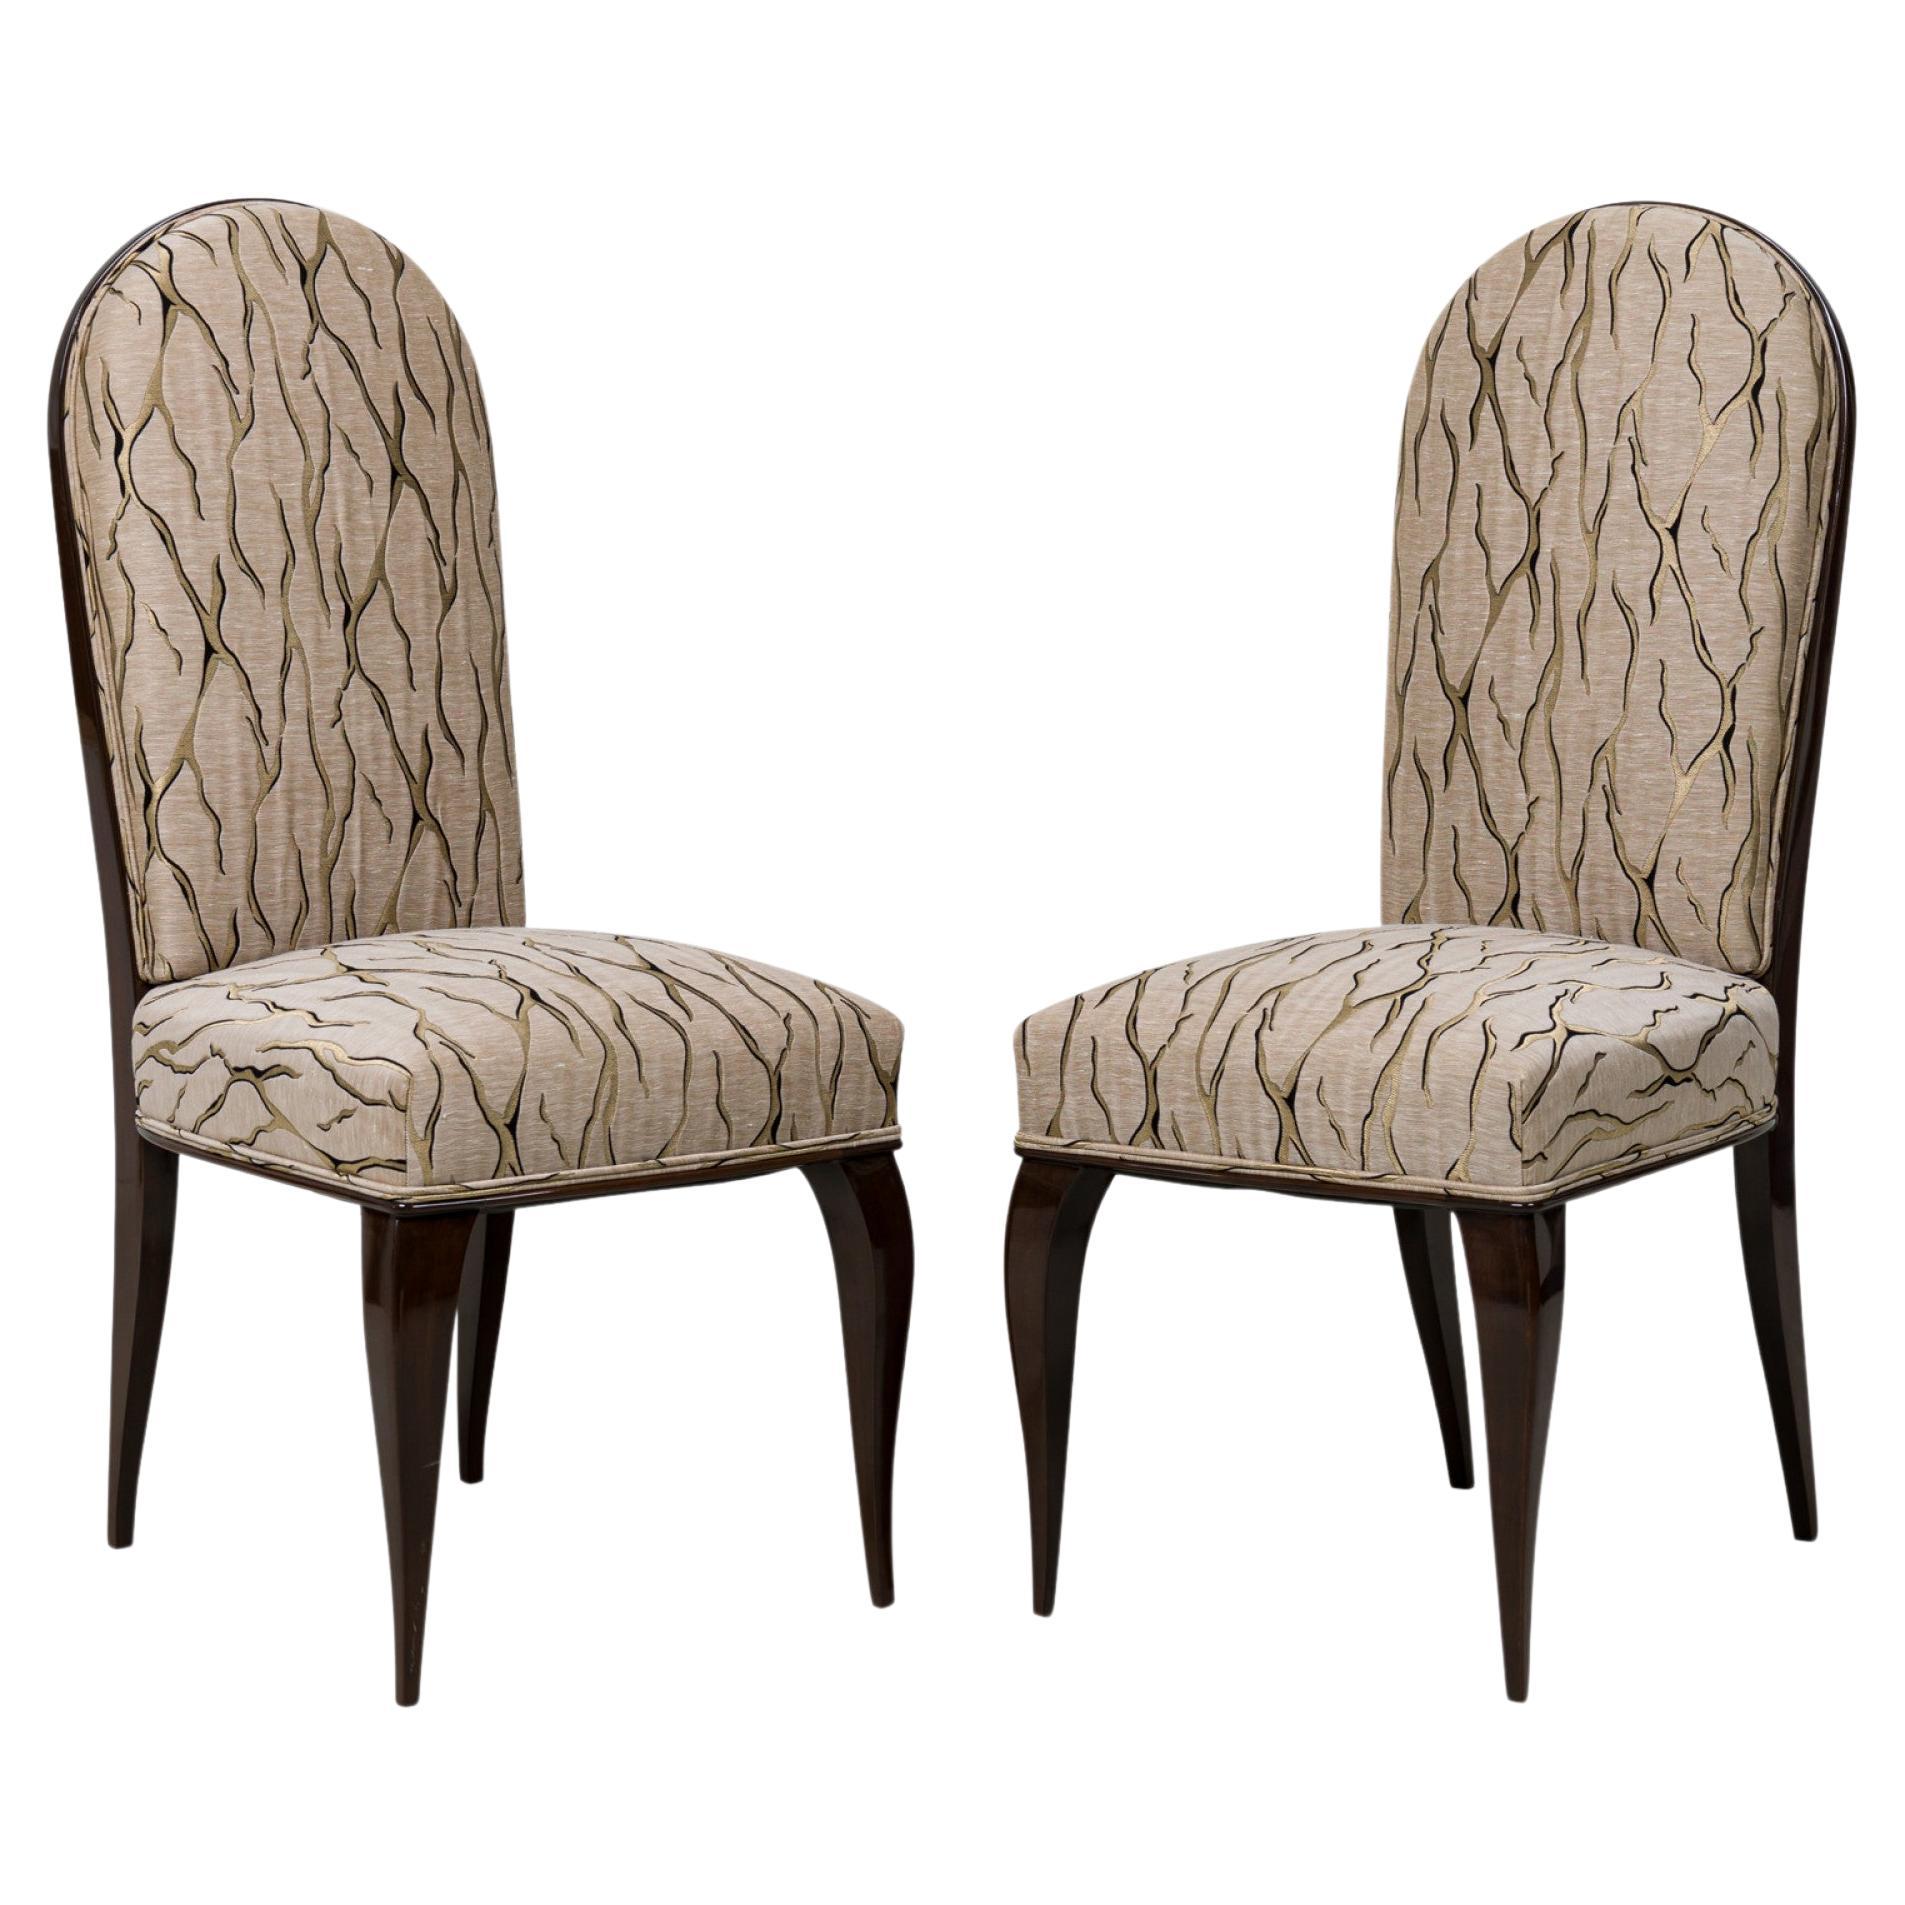 Dominique et Cie French Art Deco Mahogany Beige & Gold Upholstered Dining Chairs For Sale